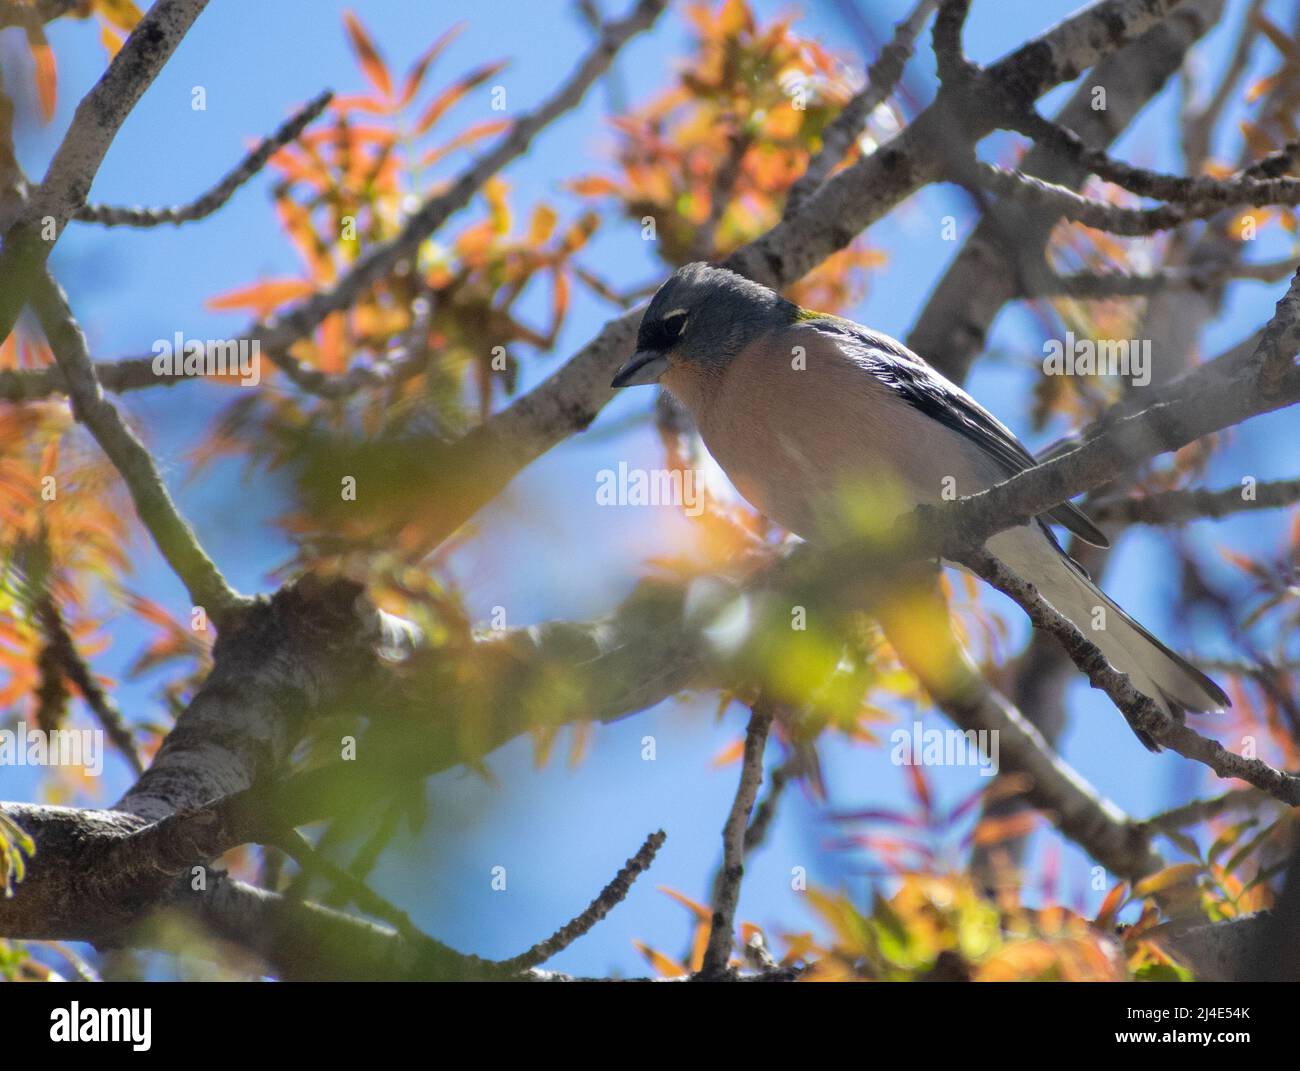 Close-up shot of Male African Chaffinch (Fringilla coelebs) Stock Photo